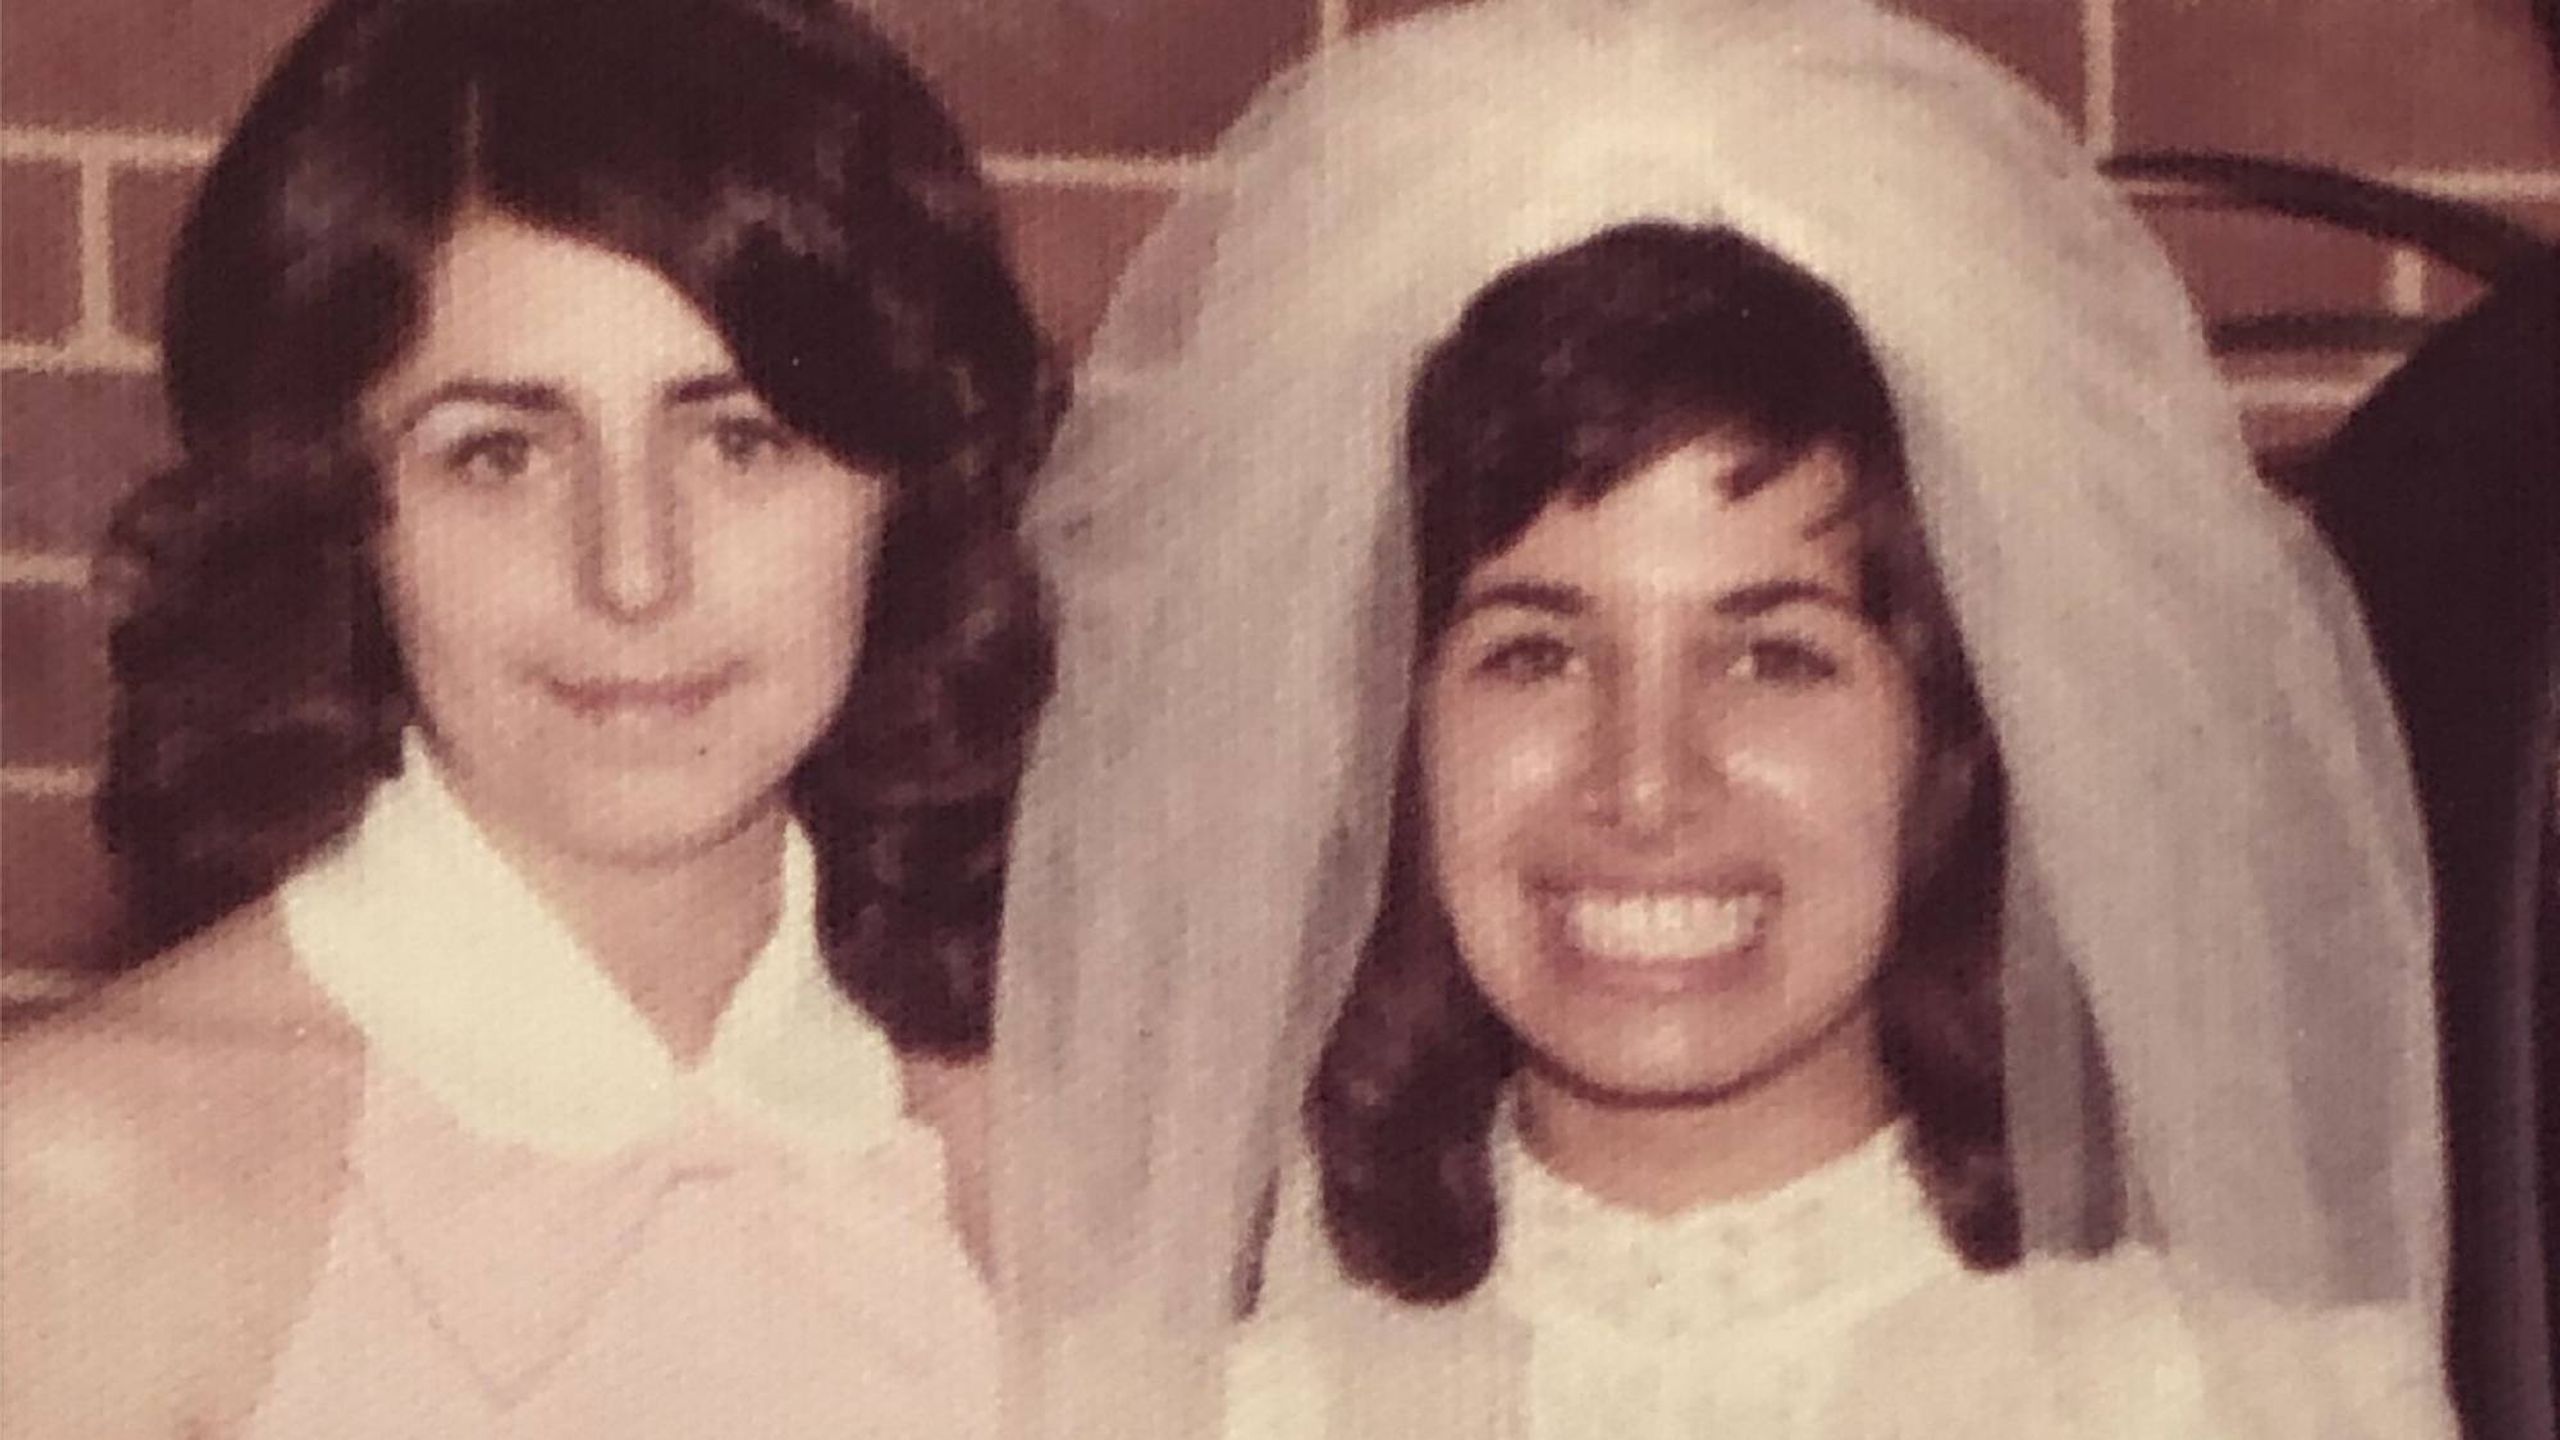 The author and her friend at her wedding in 1974. Next Avenue, dementia, friend, friendship